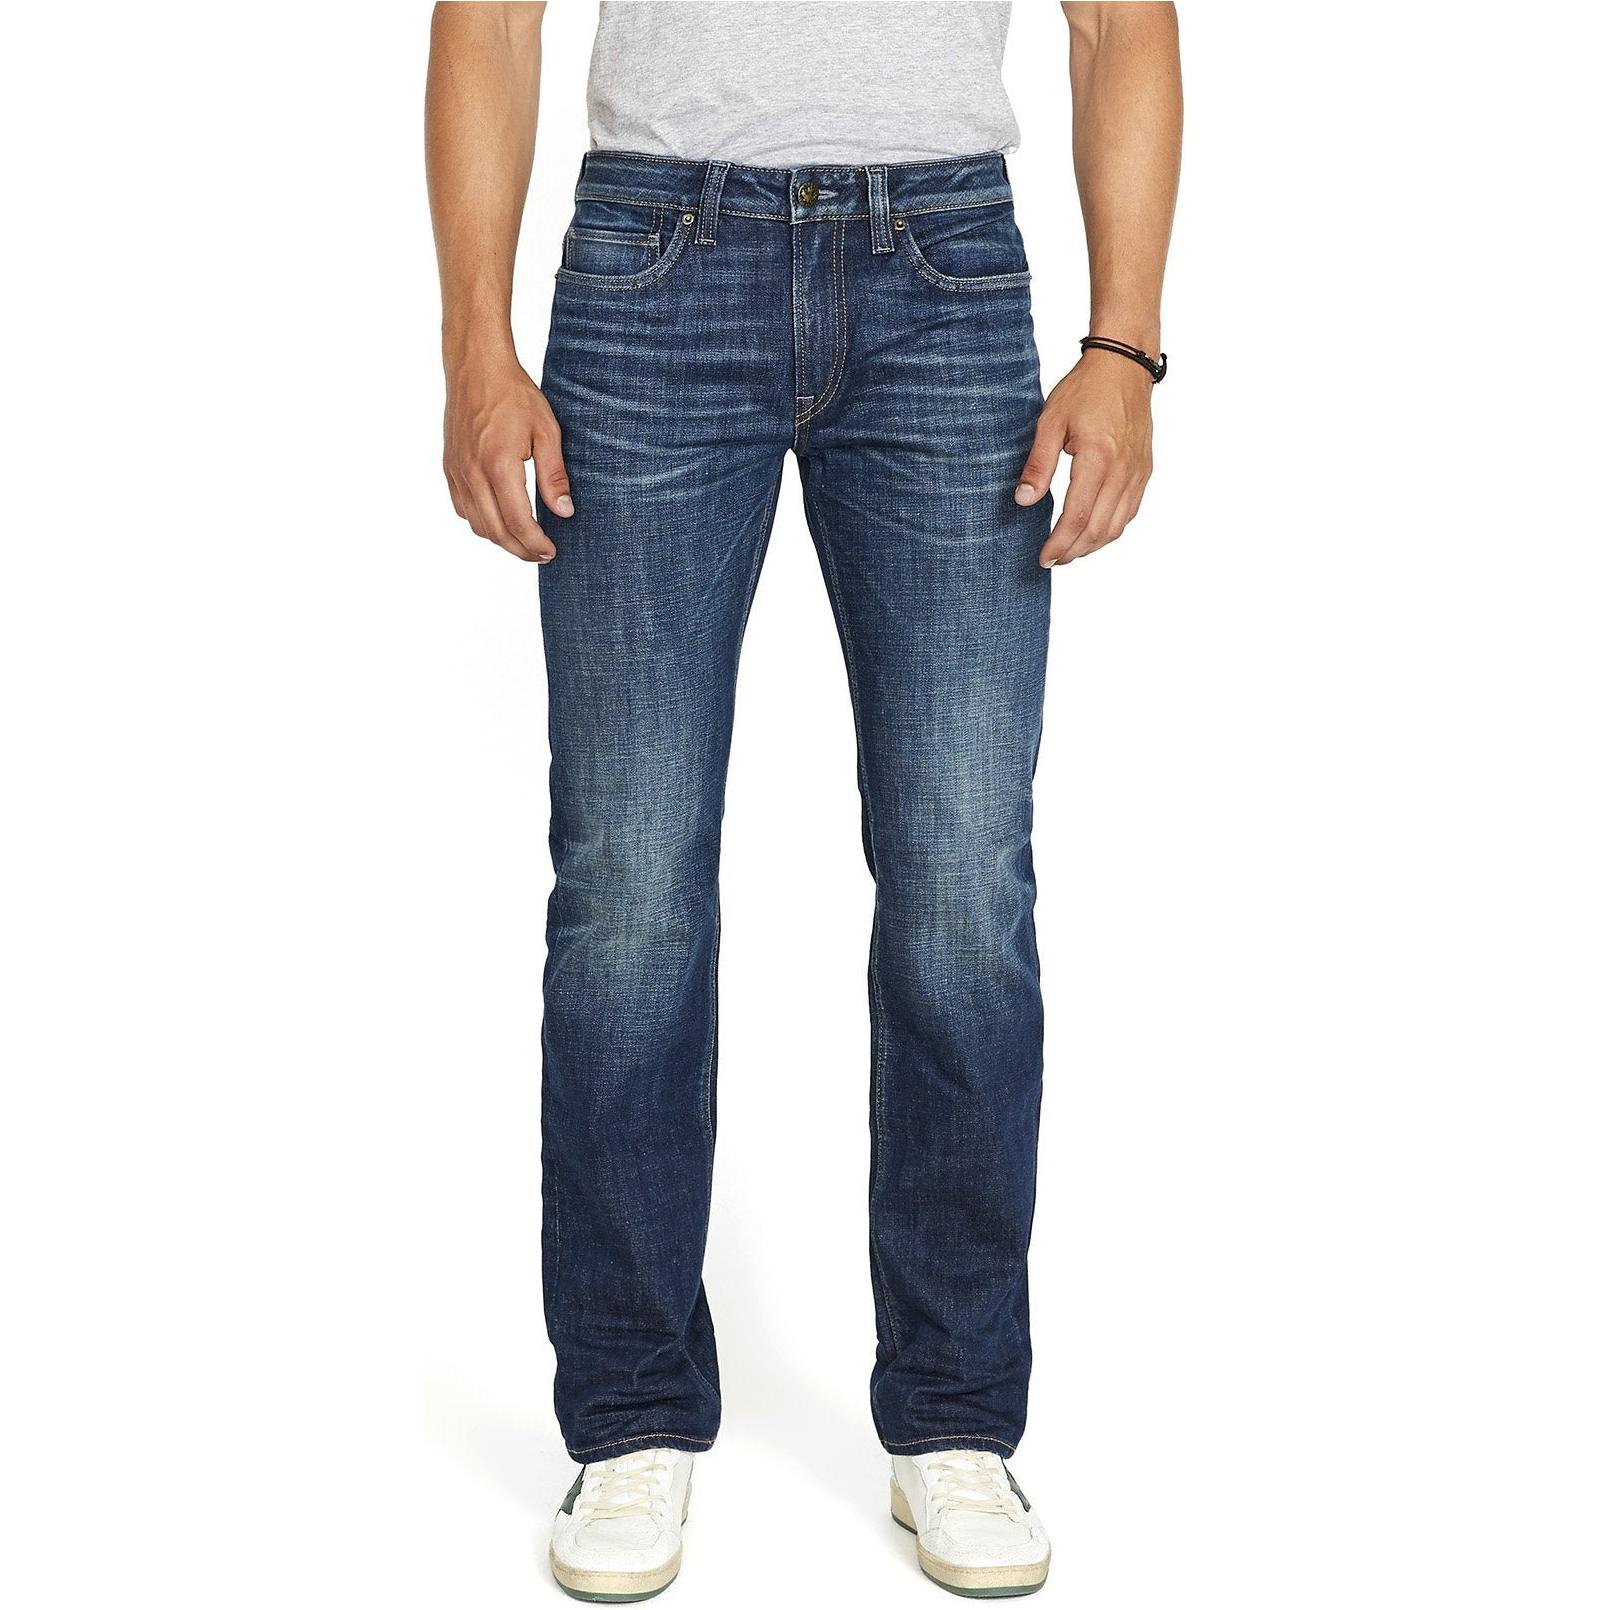 Buffalo - Driven Relaxed Straight in Sanded Indigo - BM22640-SQ8626575